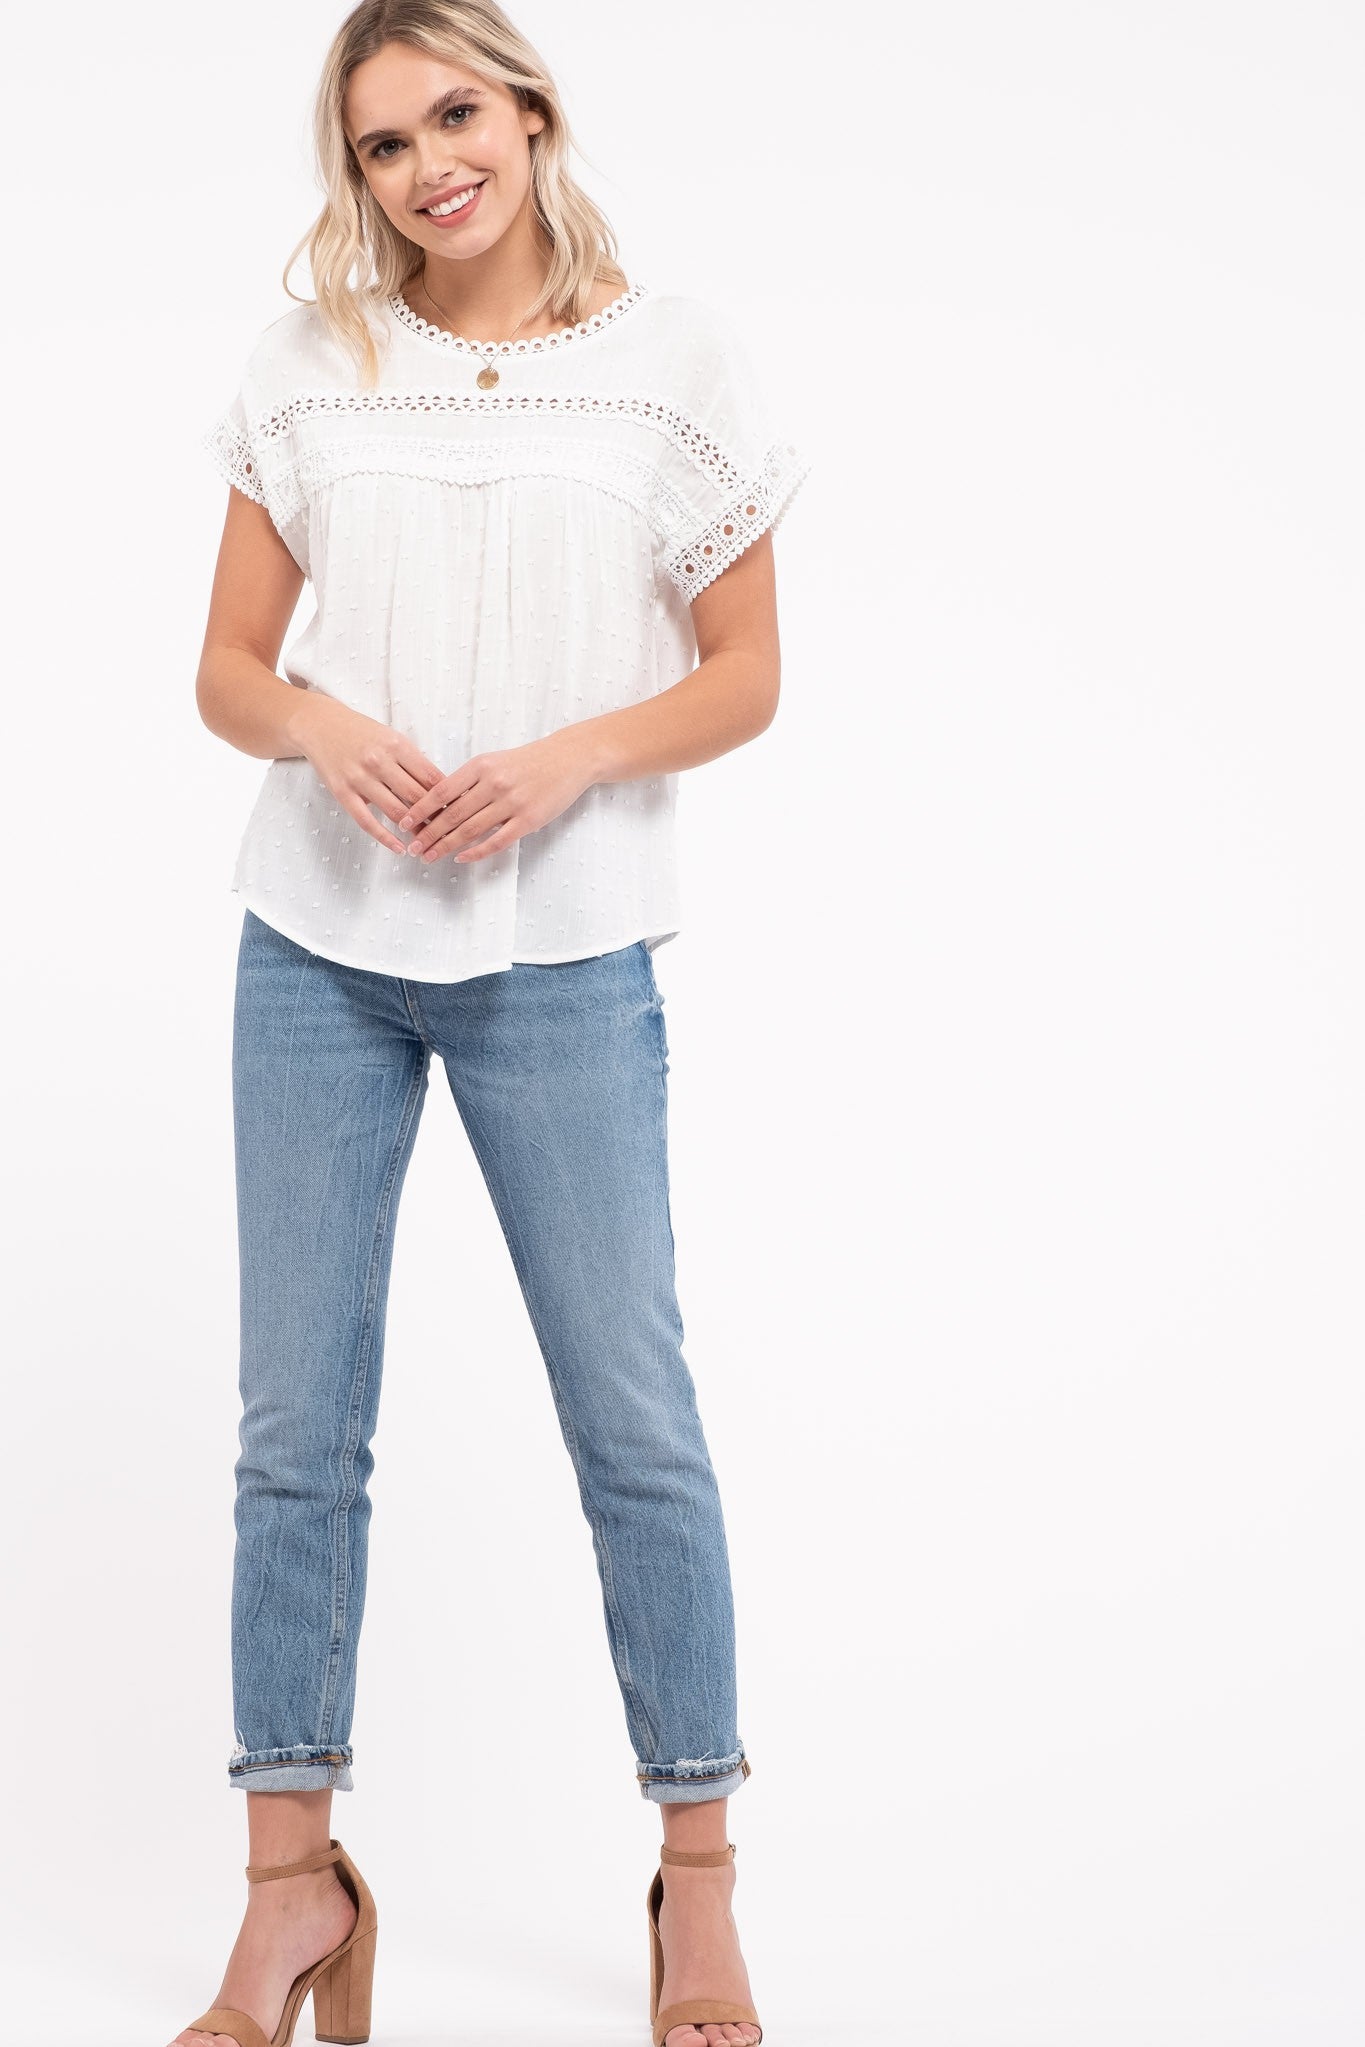 The Mikia Dotted Eyelet Top